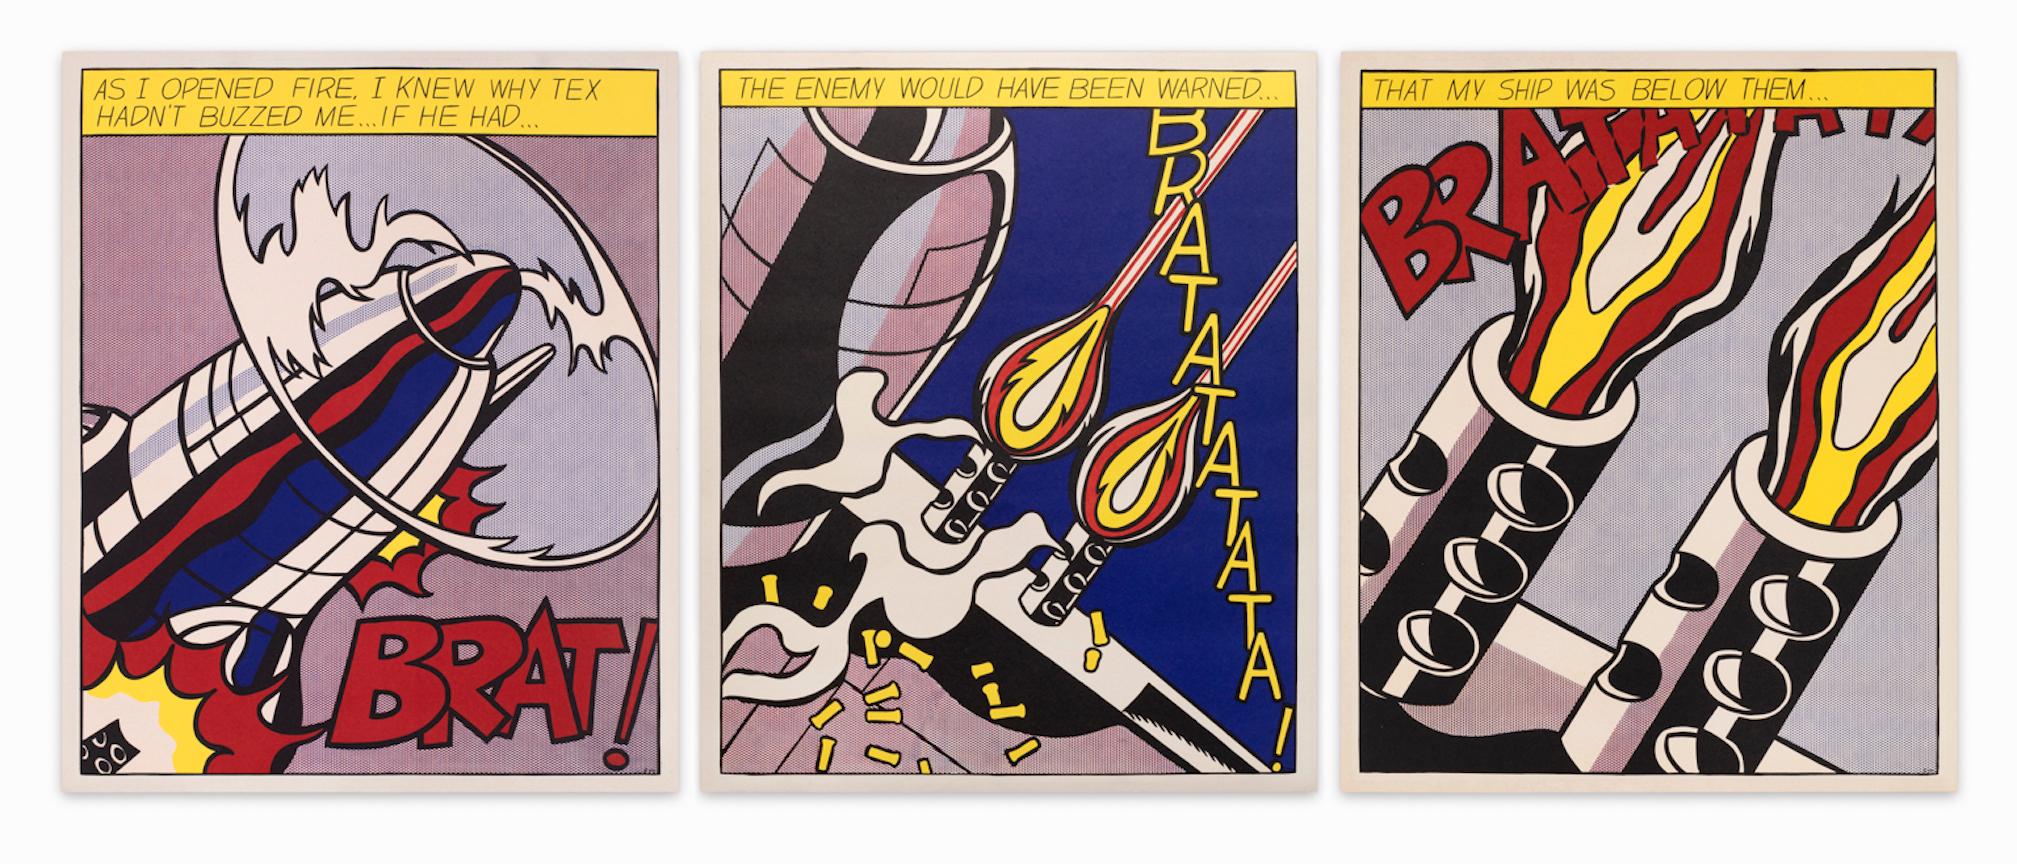 SALE ONE WEEK ONLY

"As I opened fire" is a lithograph triptych by Roy Lichtenstein whose provenance is printed on verso: Coll. Stedelijk Museum Amsterdam. Editions were copyrighted by the Stedelijk Museum Amsterdam and corrected with the original